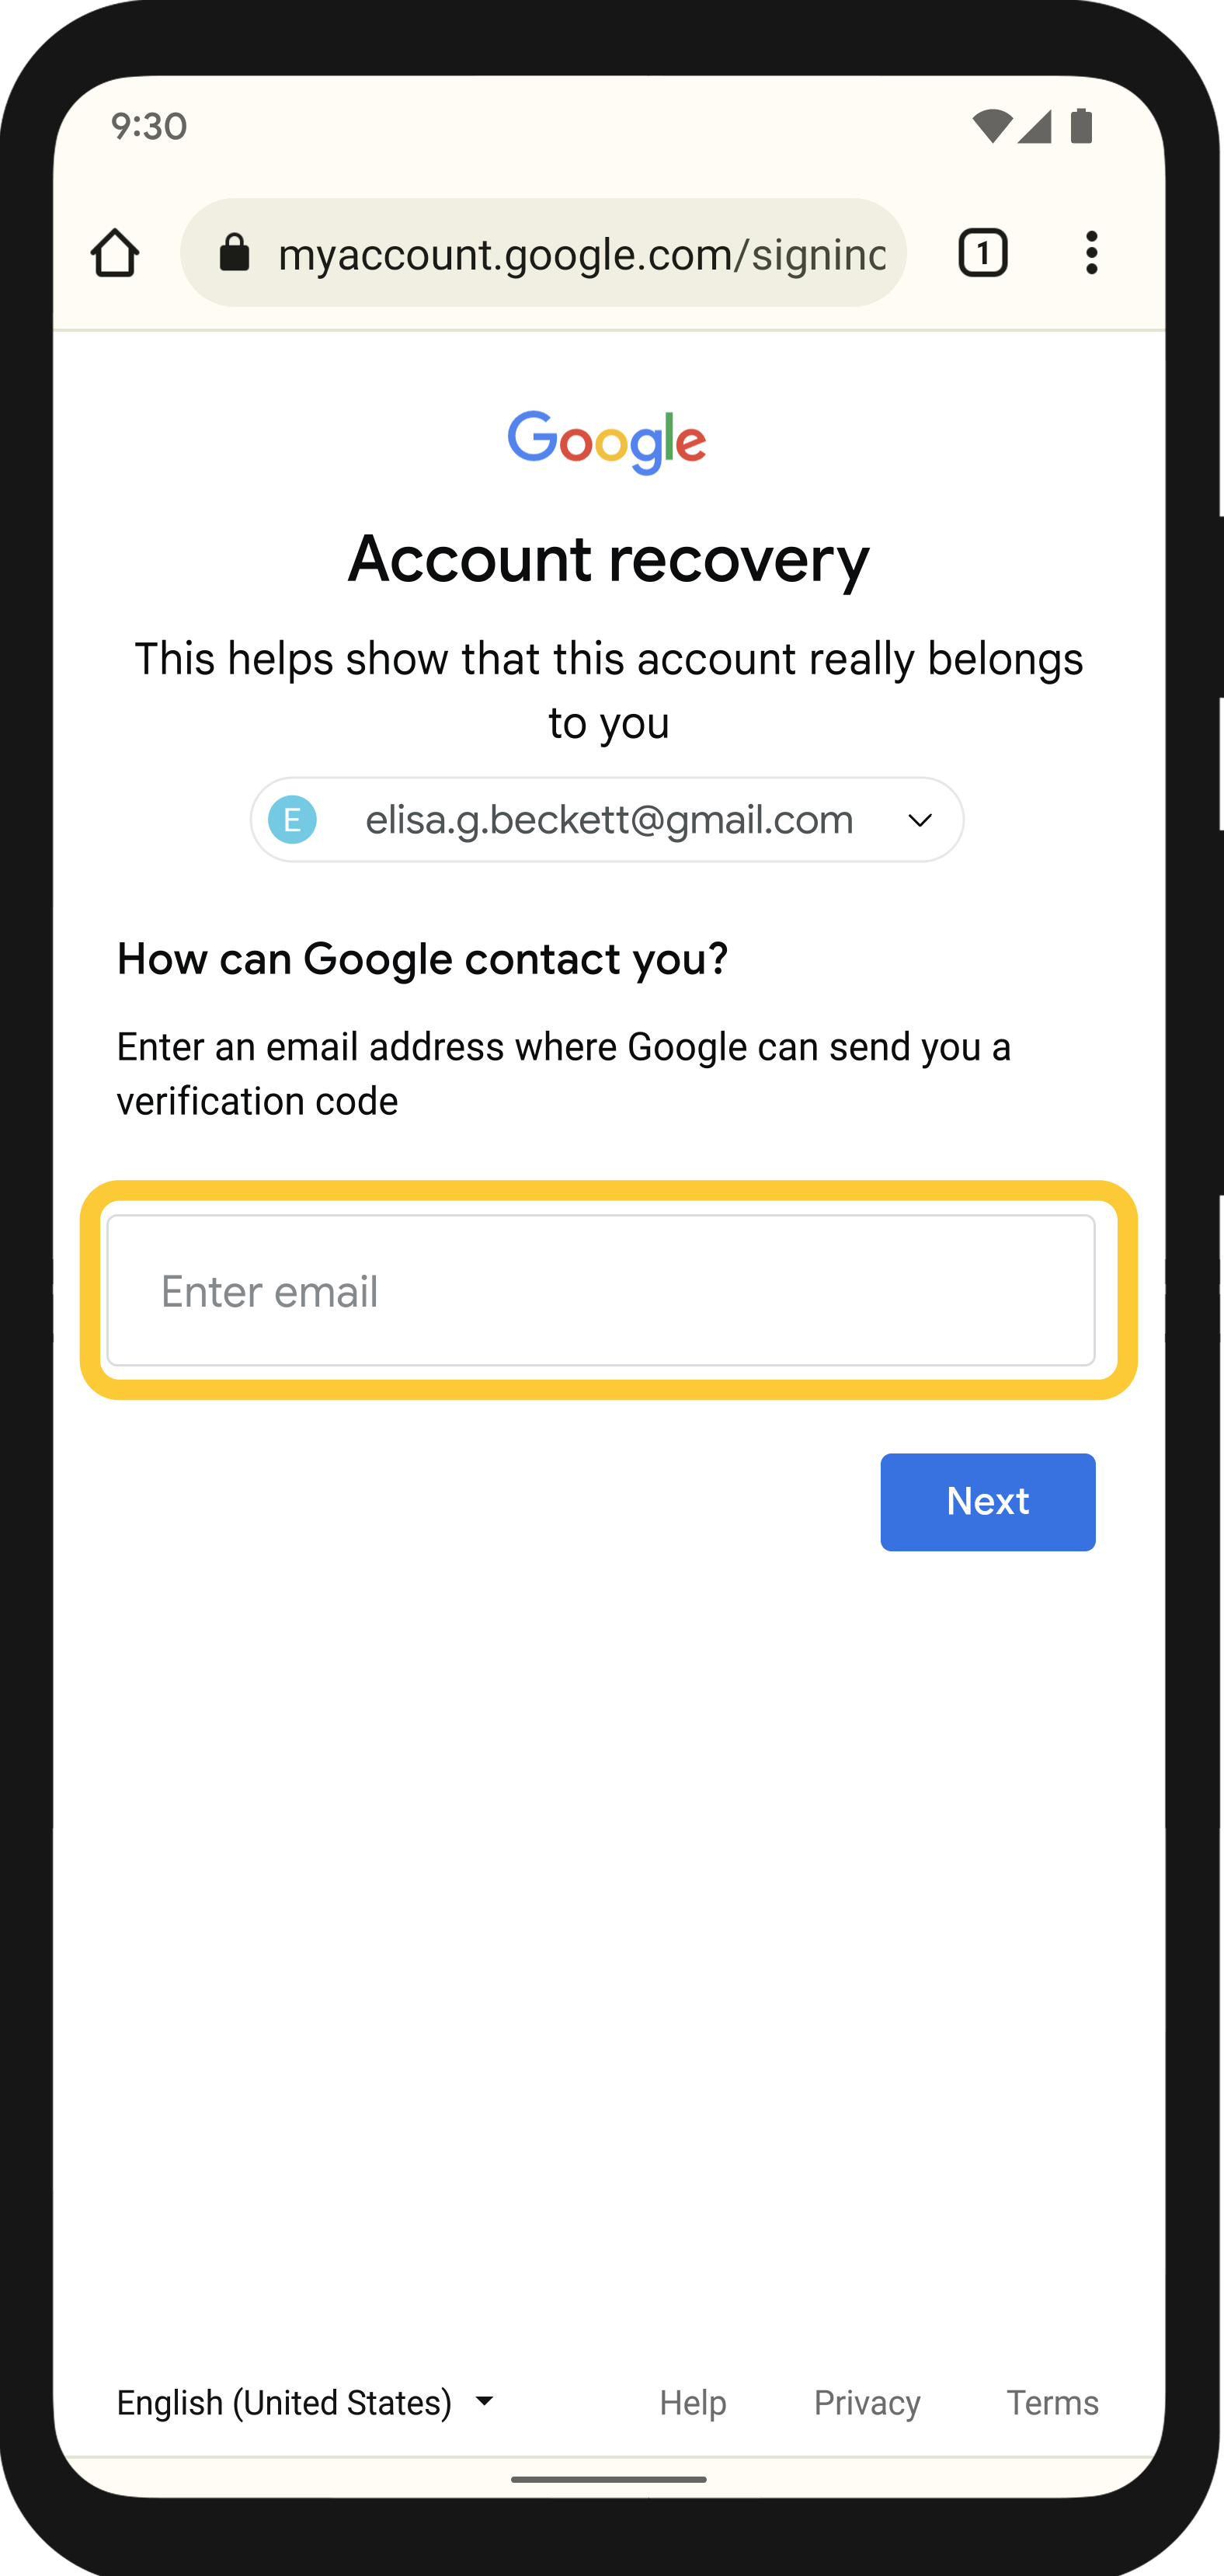 Let Google Contact You